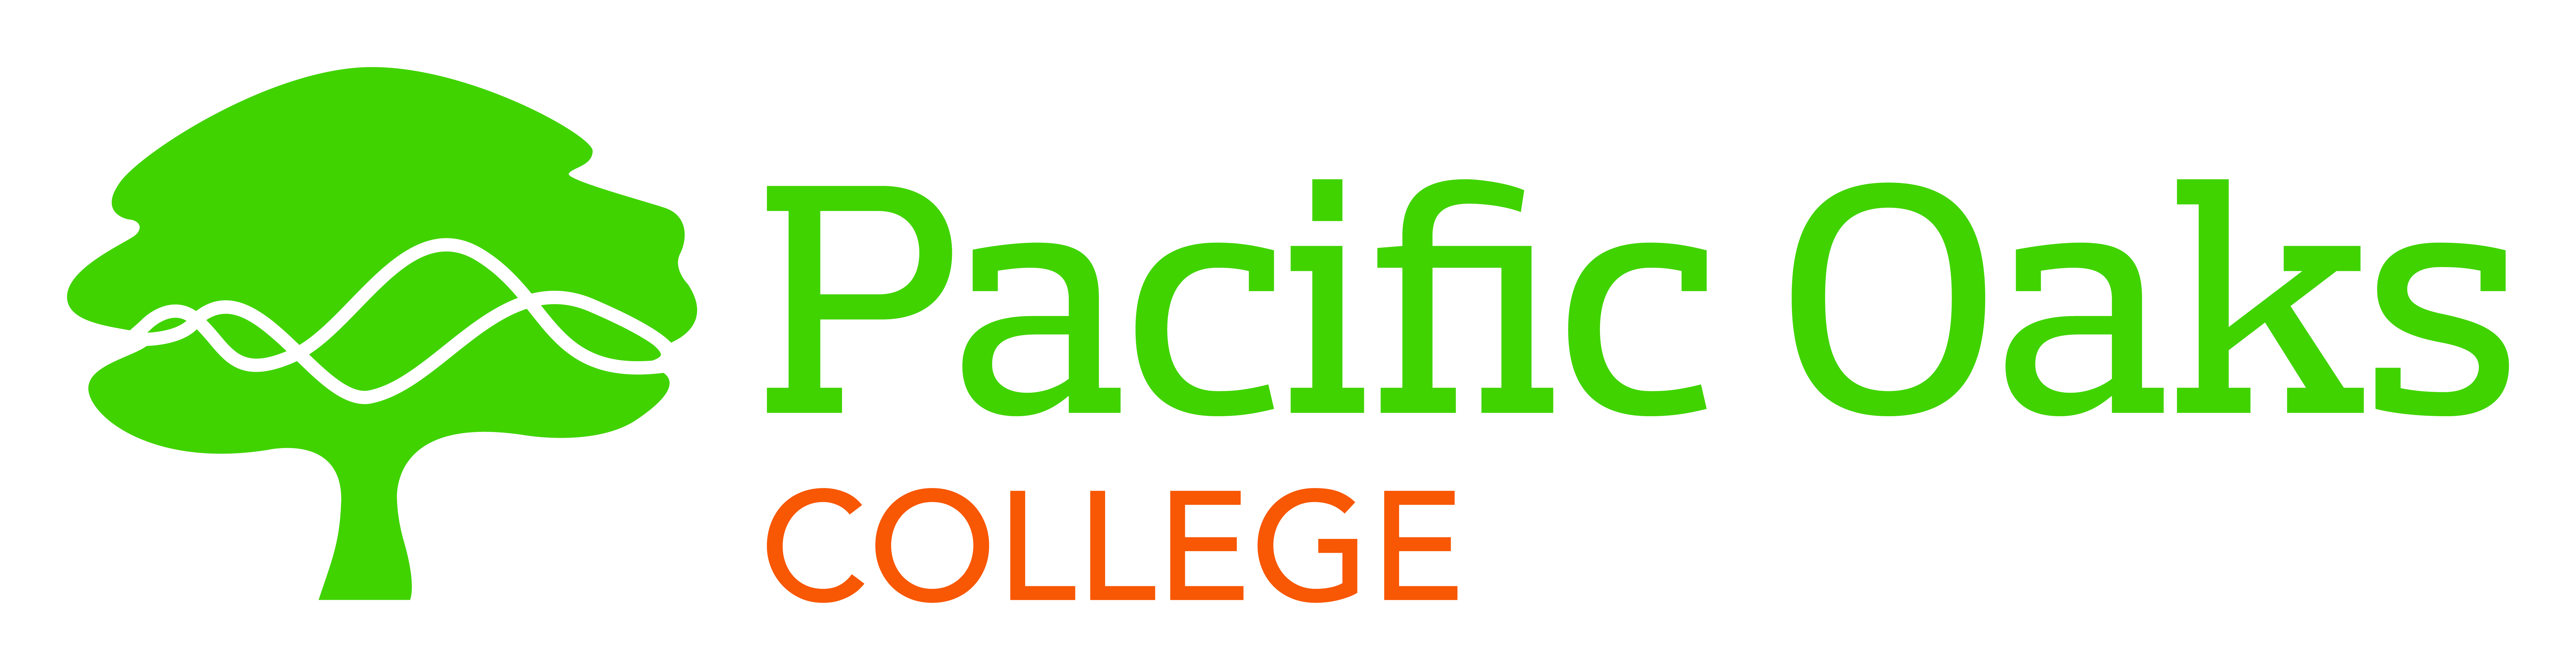 Refreshed Pacific Oaks College Logo